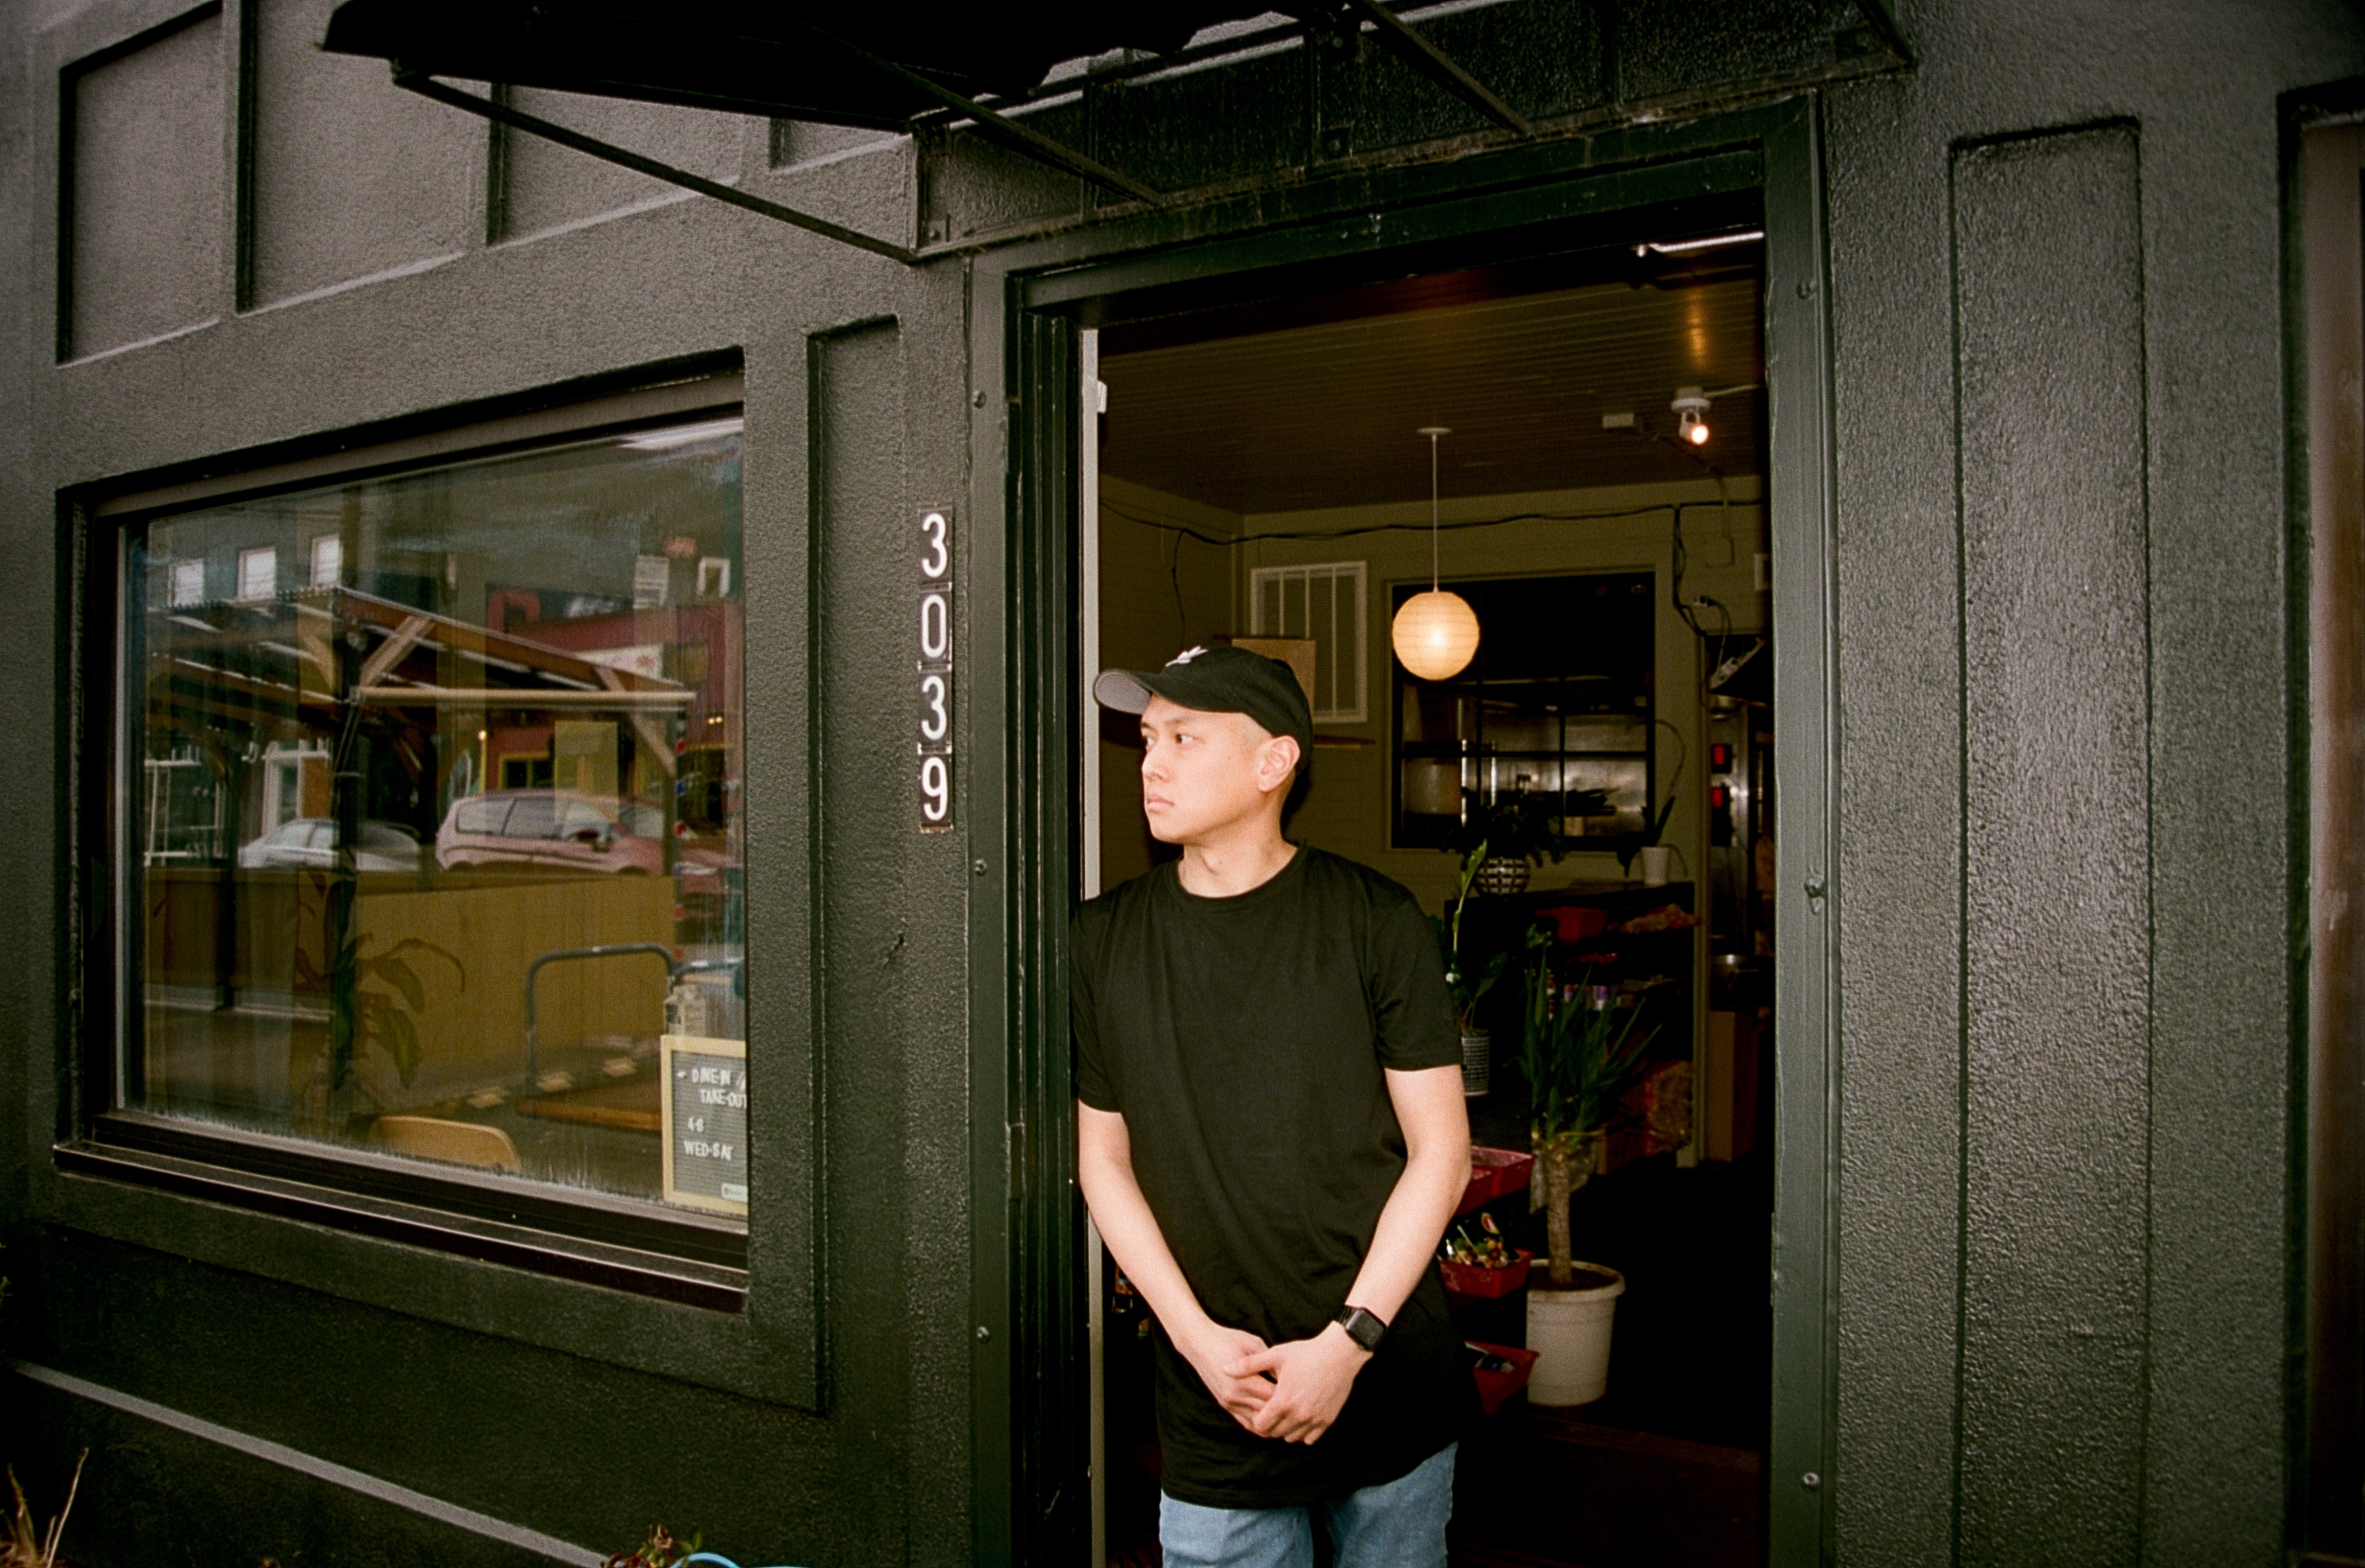 Jimmy Le, wearing a black baseball cap and t-shirt, leans against the doorway at Thom